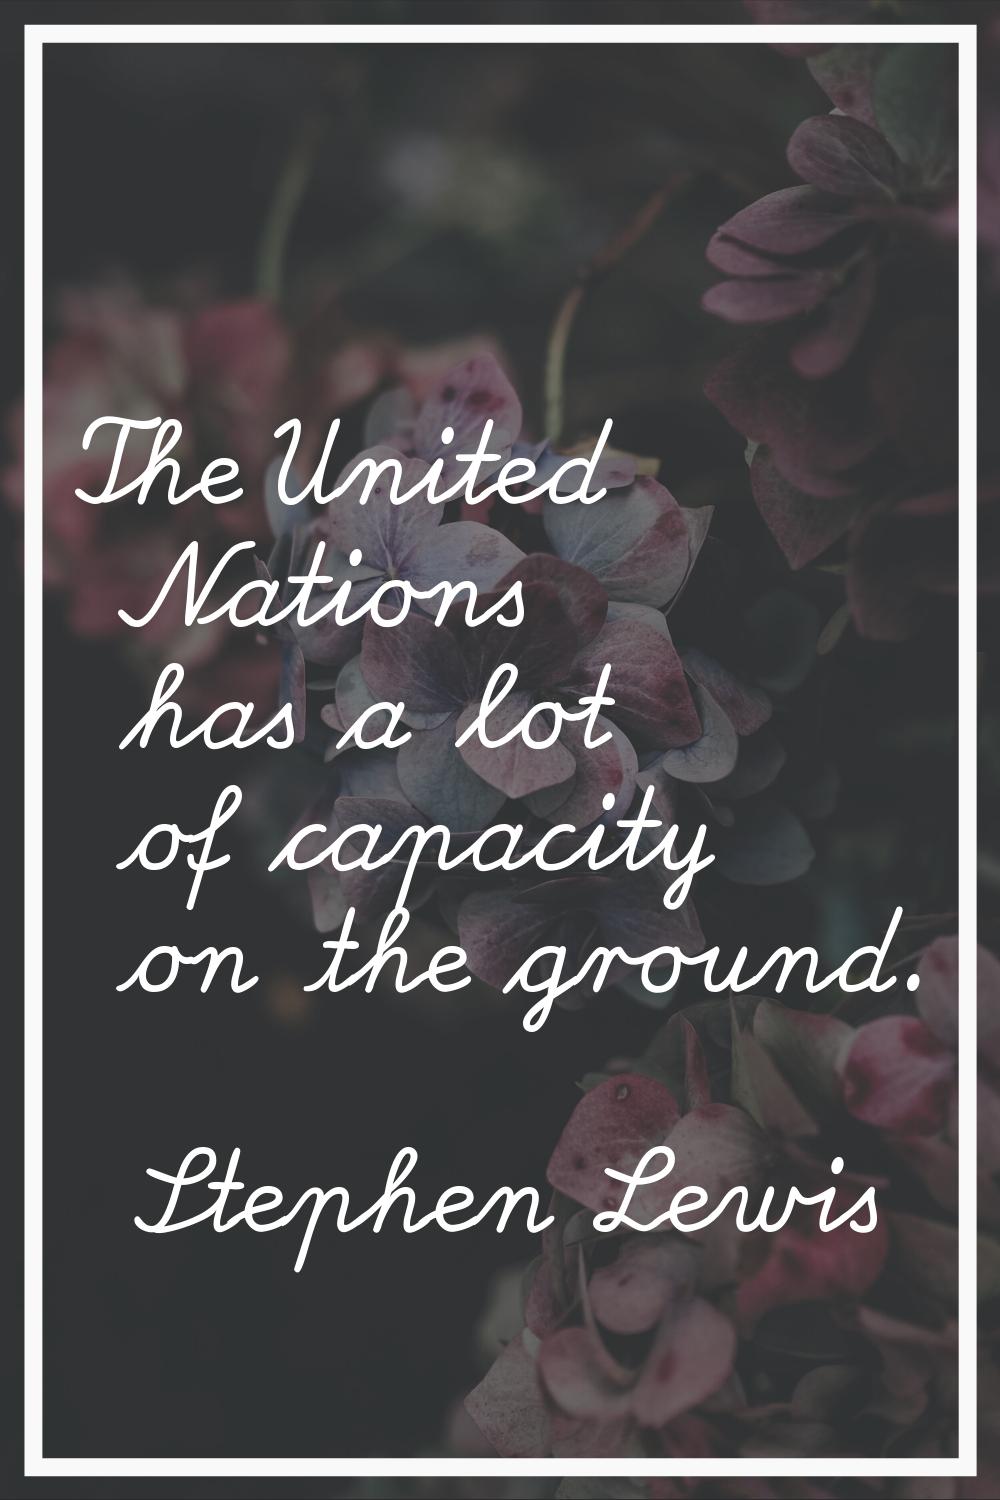 The United Nations has a lot of capacity on the ground.